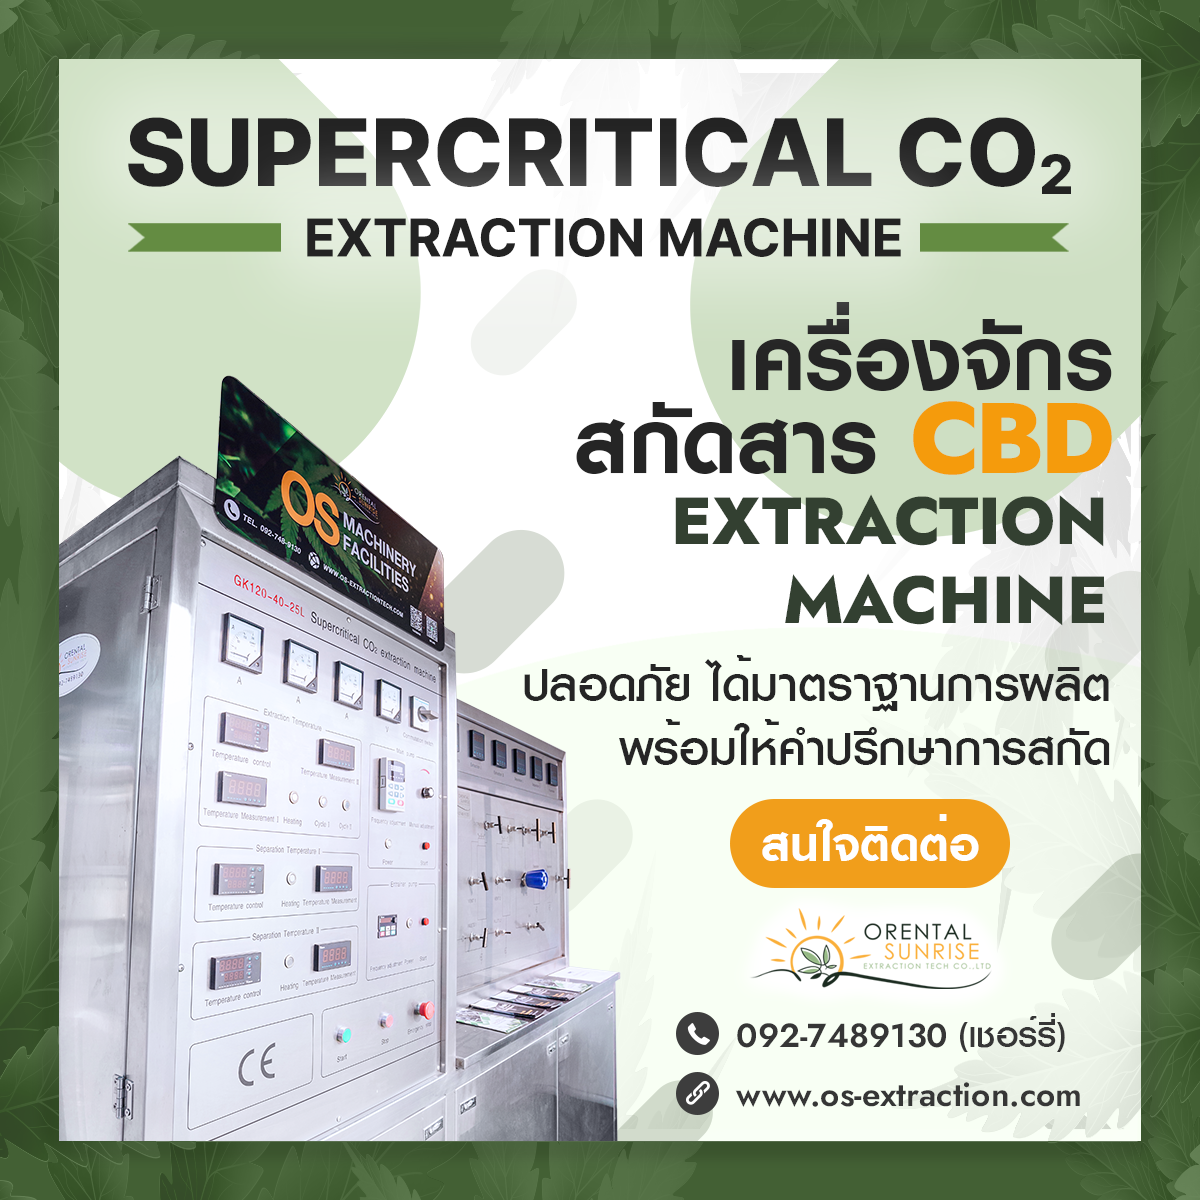 Supercritical CO2 Extraction Machine📌